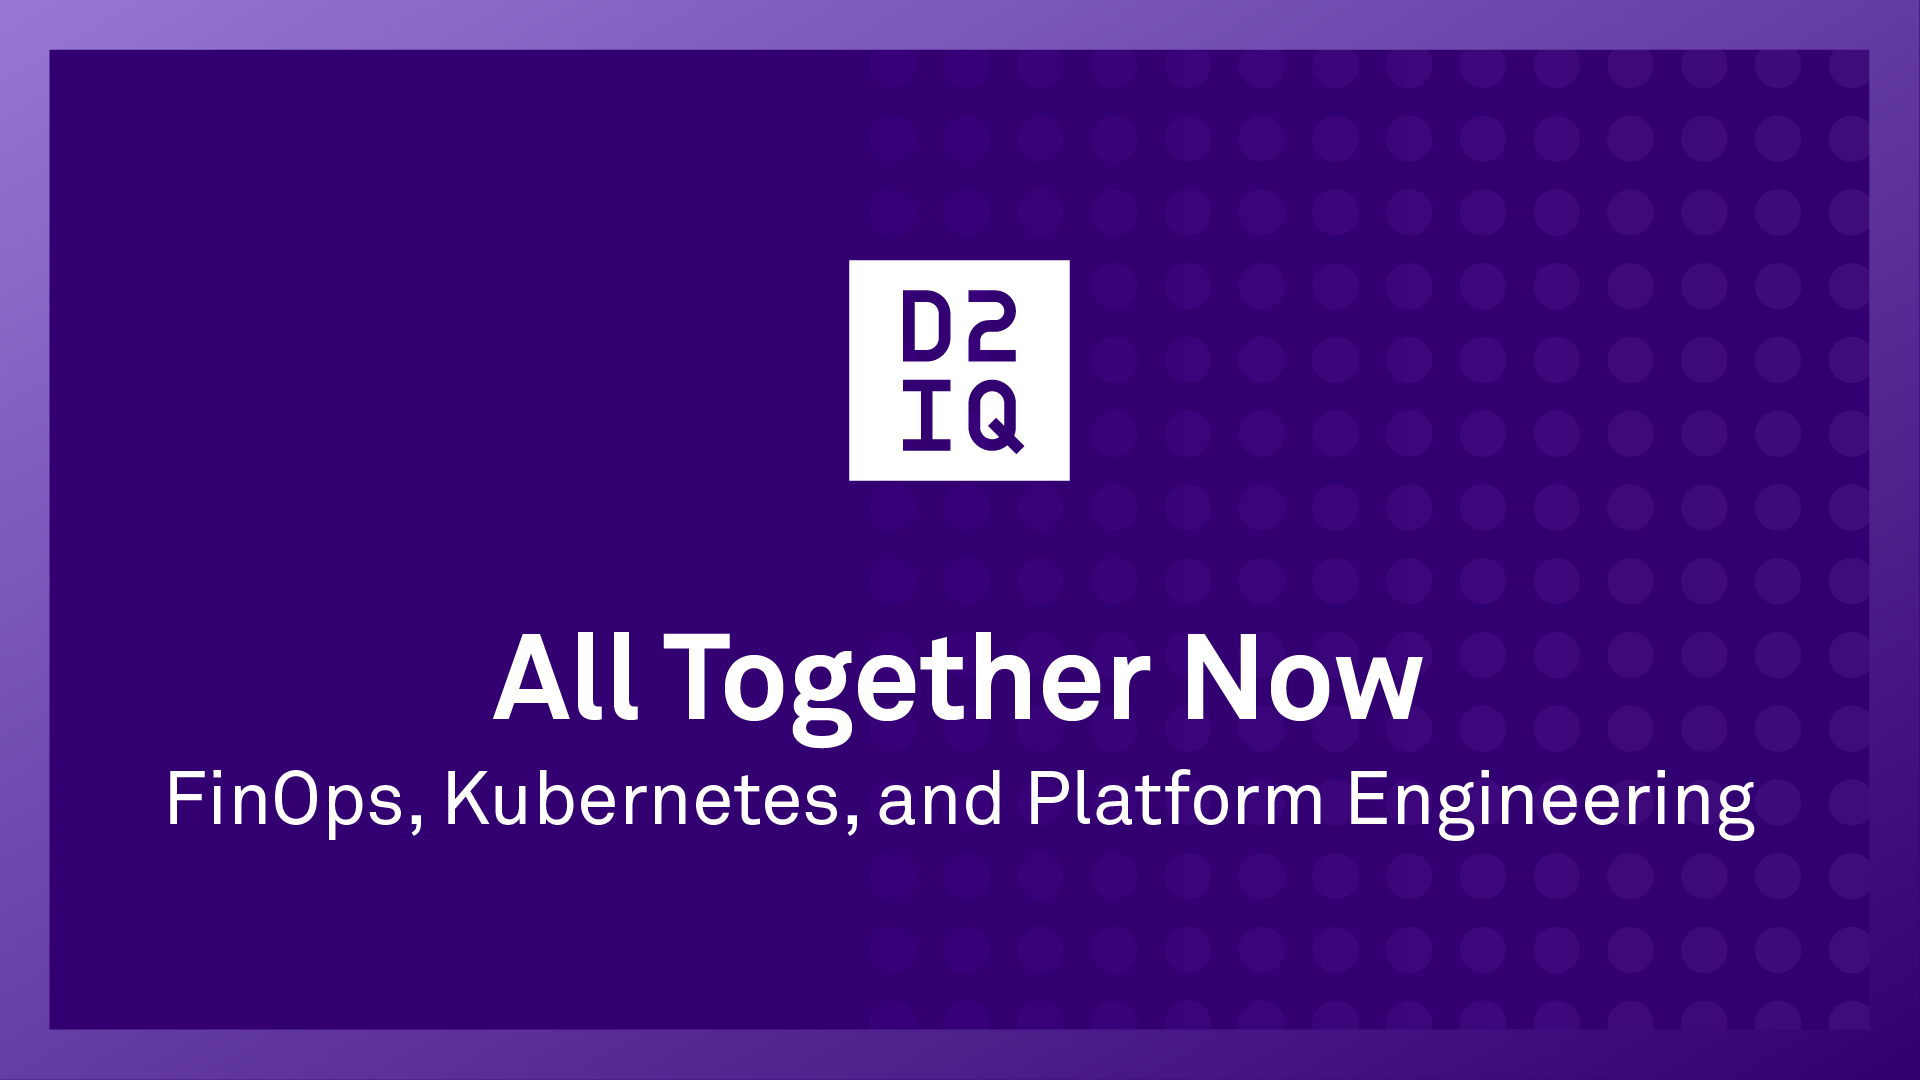 All Together Now: FinOps, Kubernetes, and Platform Engineering